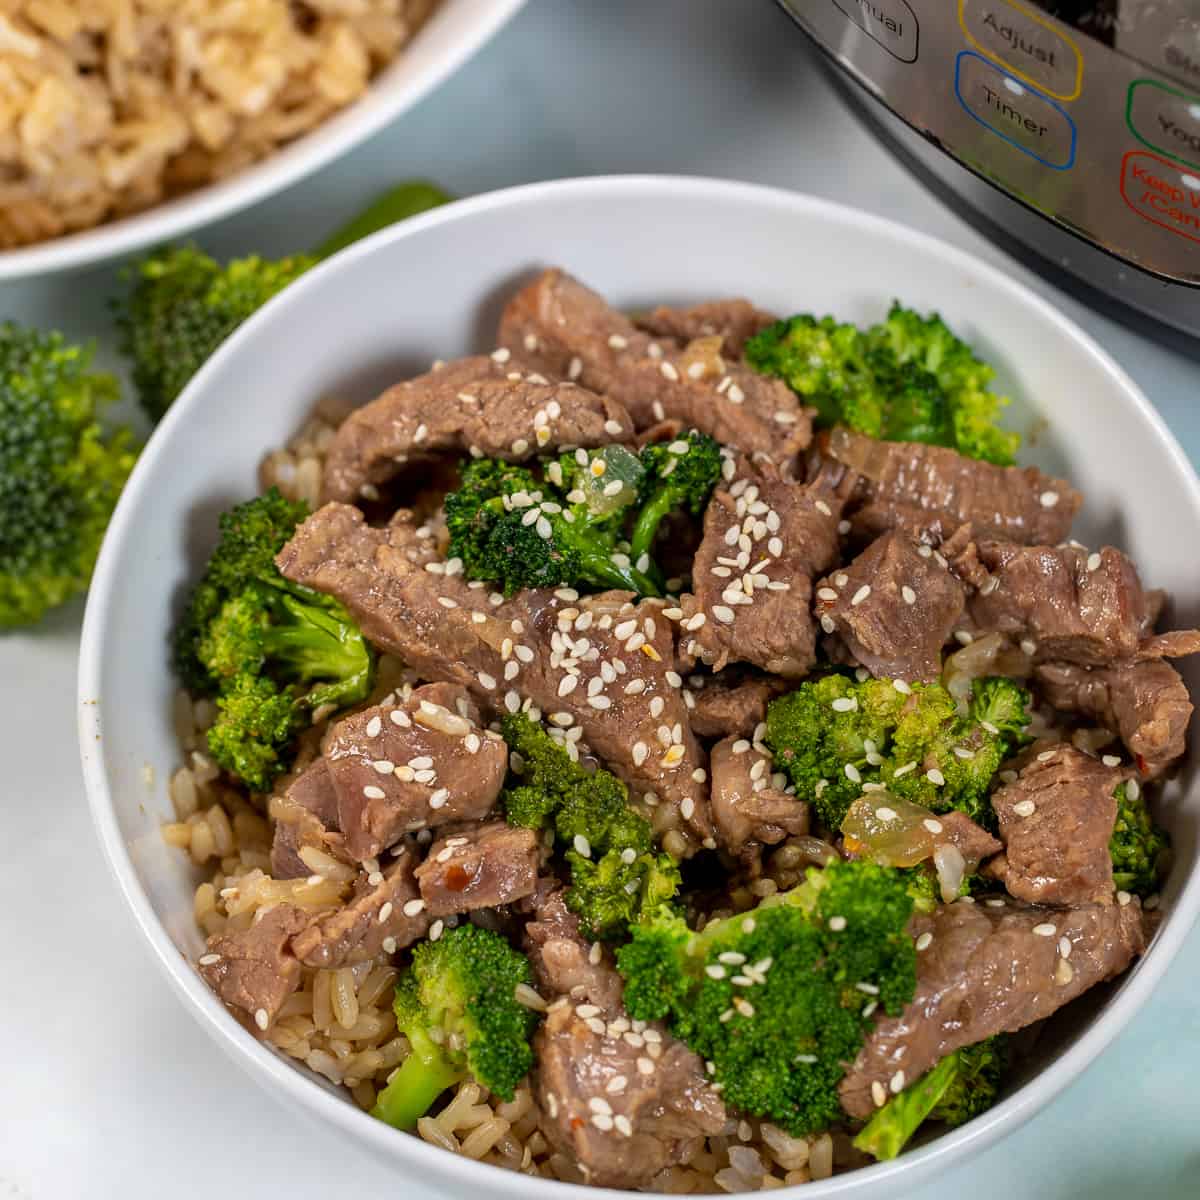 Beef and Broccoli in white bowl topped with sesaame seeds.